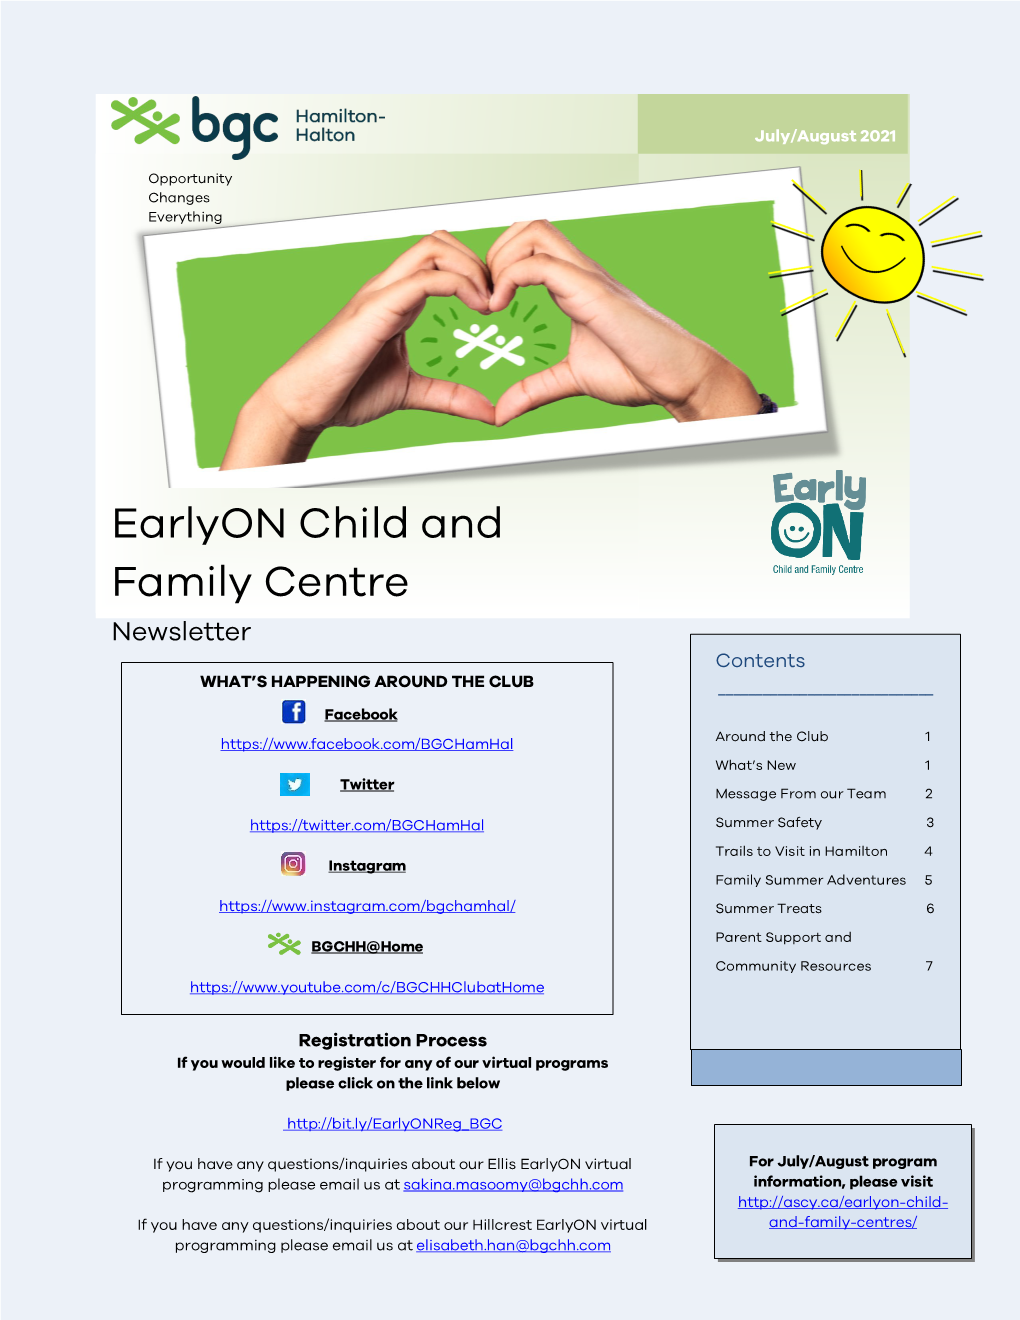 Earlyon Child and Family Centre Newsletter Contents